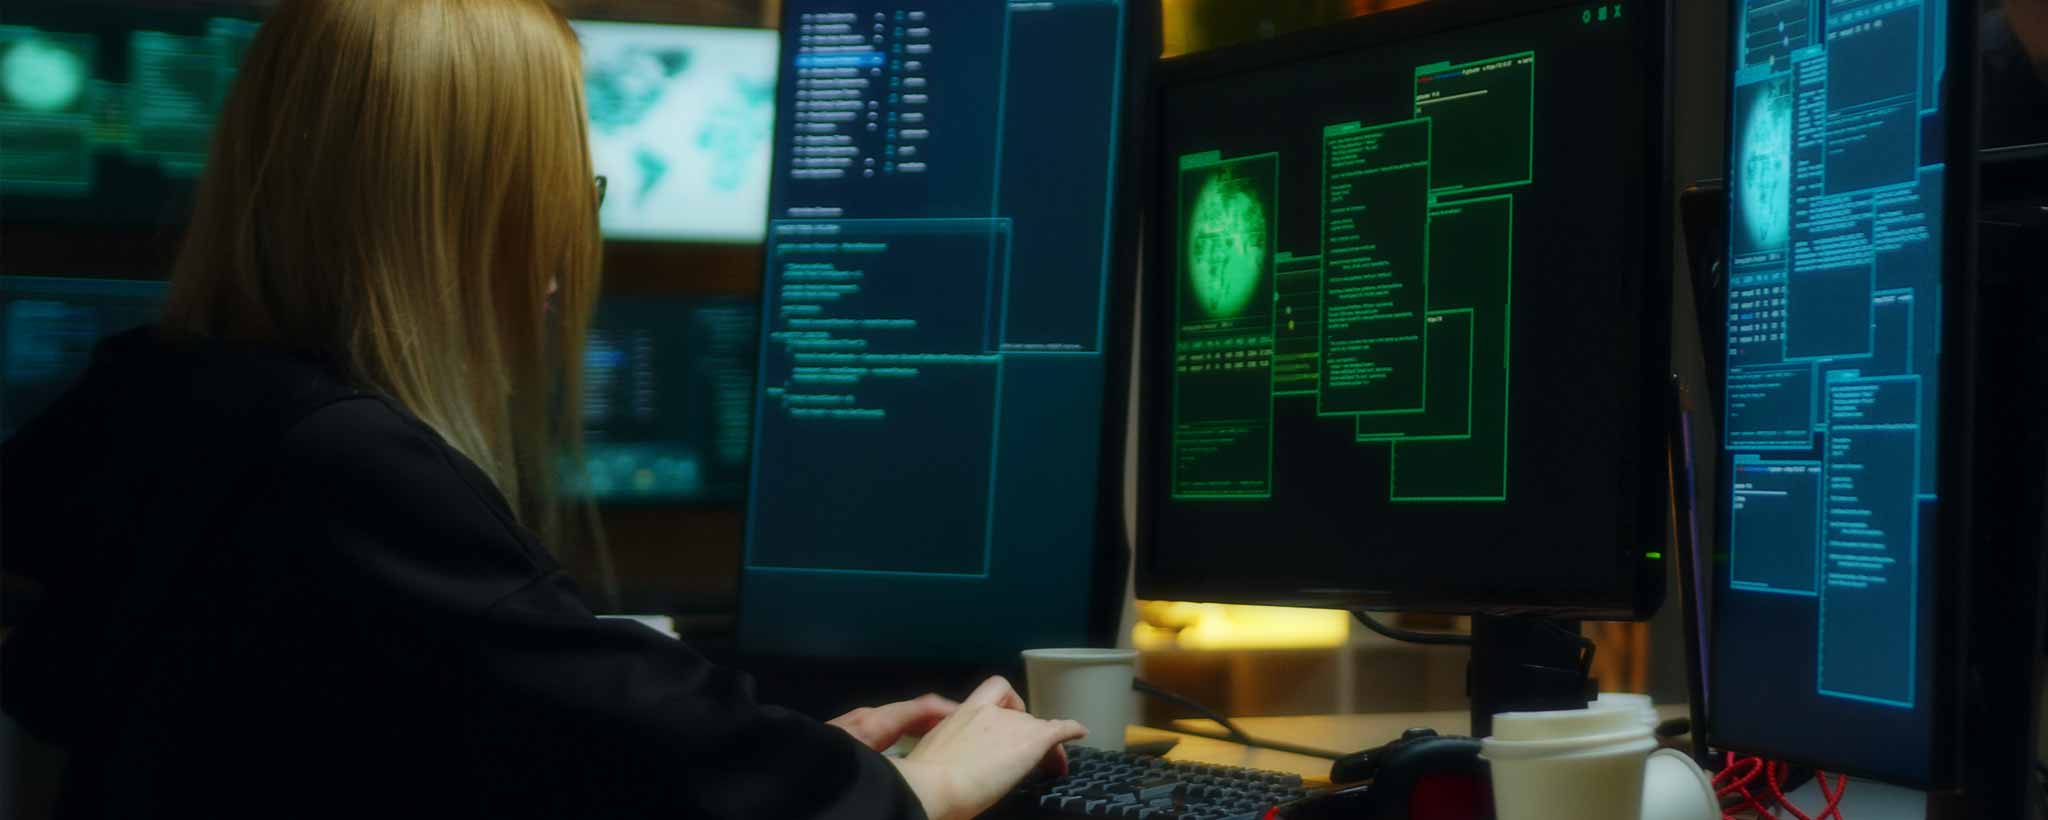 'Female hacker with computers'